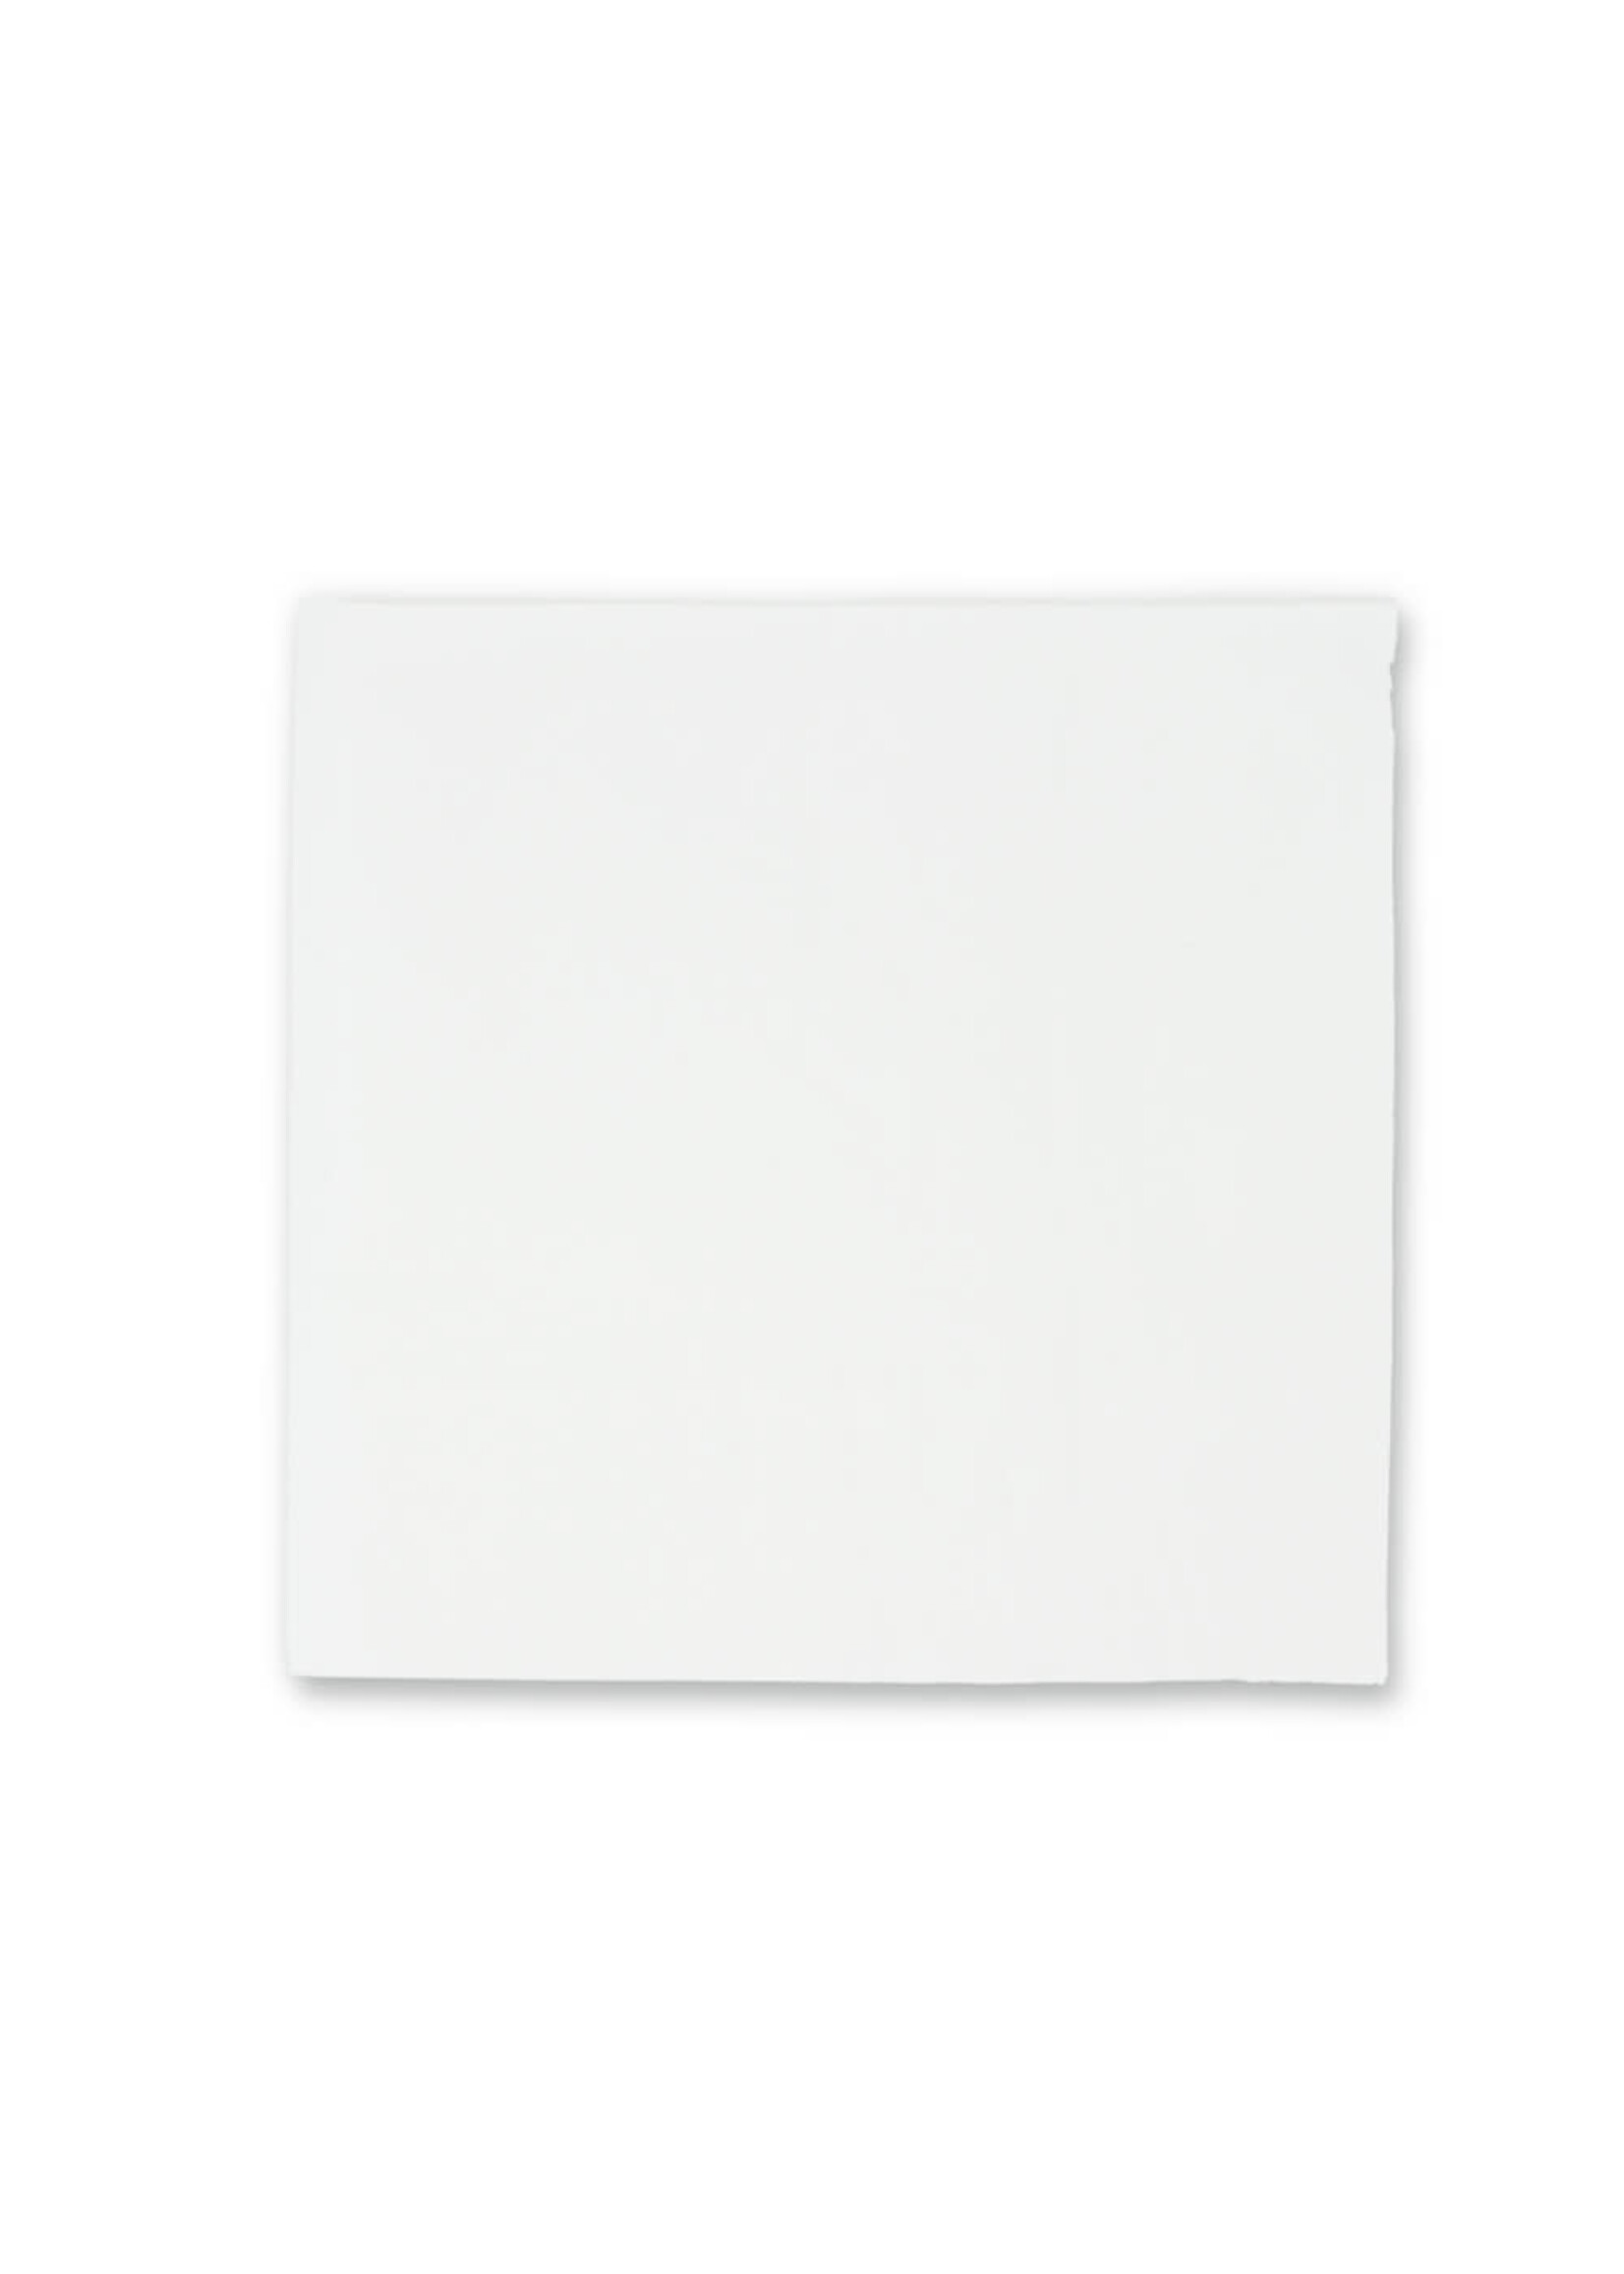 LUNCH NAPKIN 50CT 2PLY WHITE